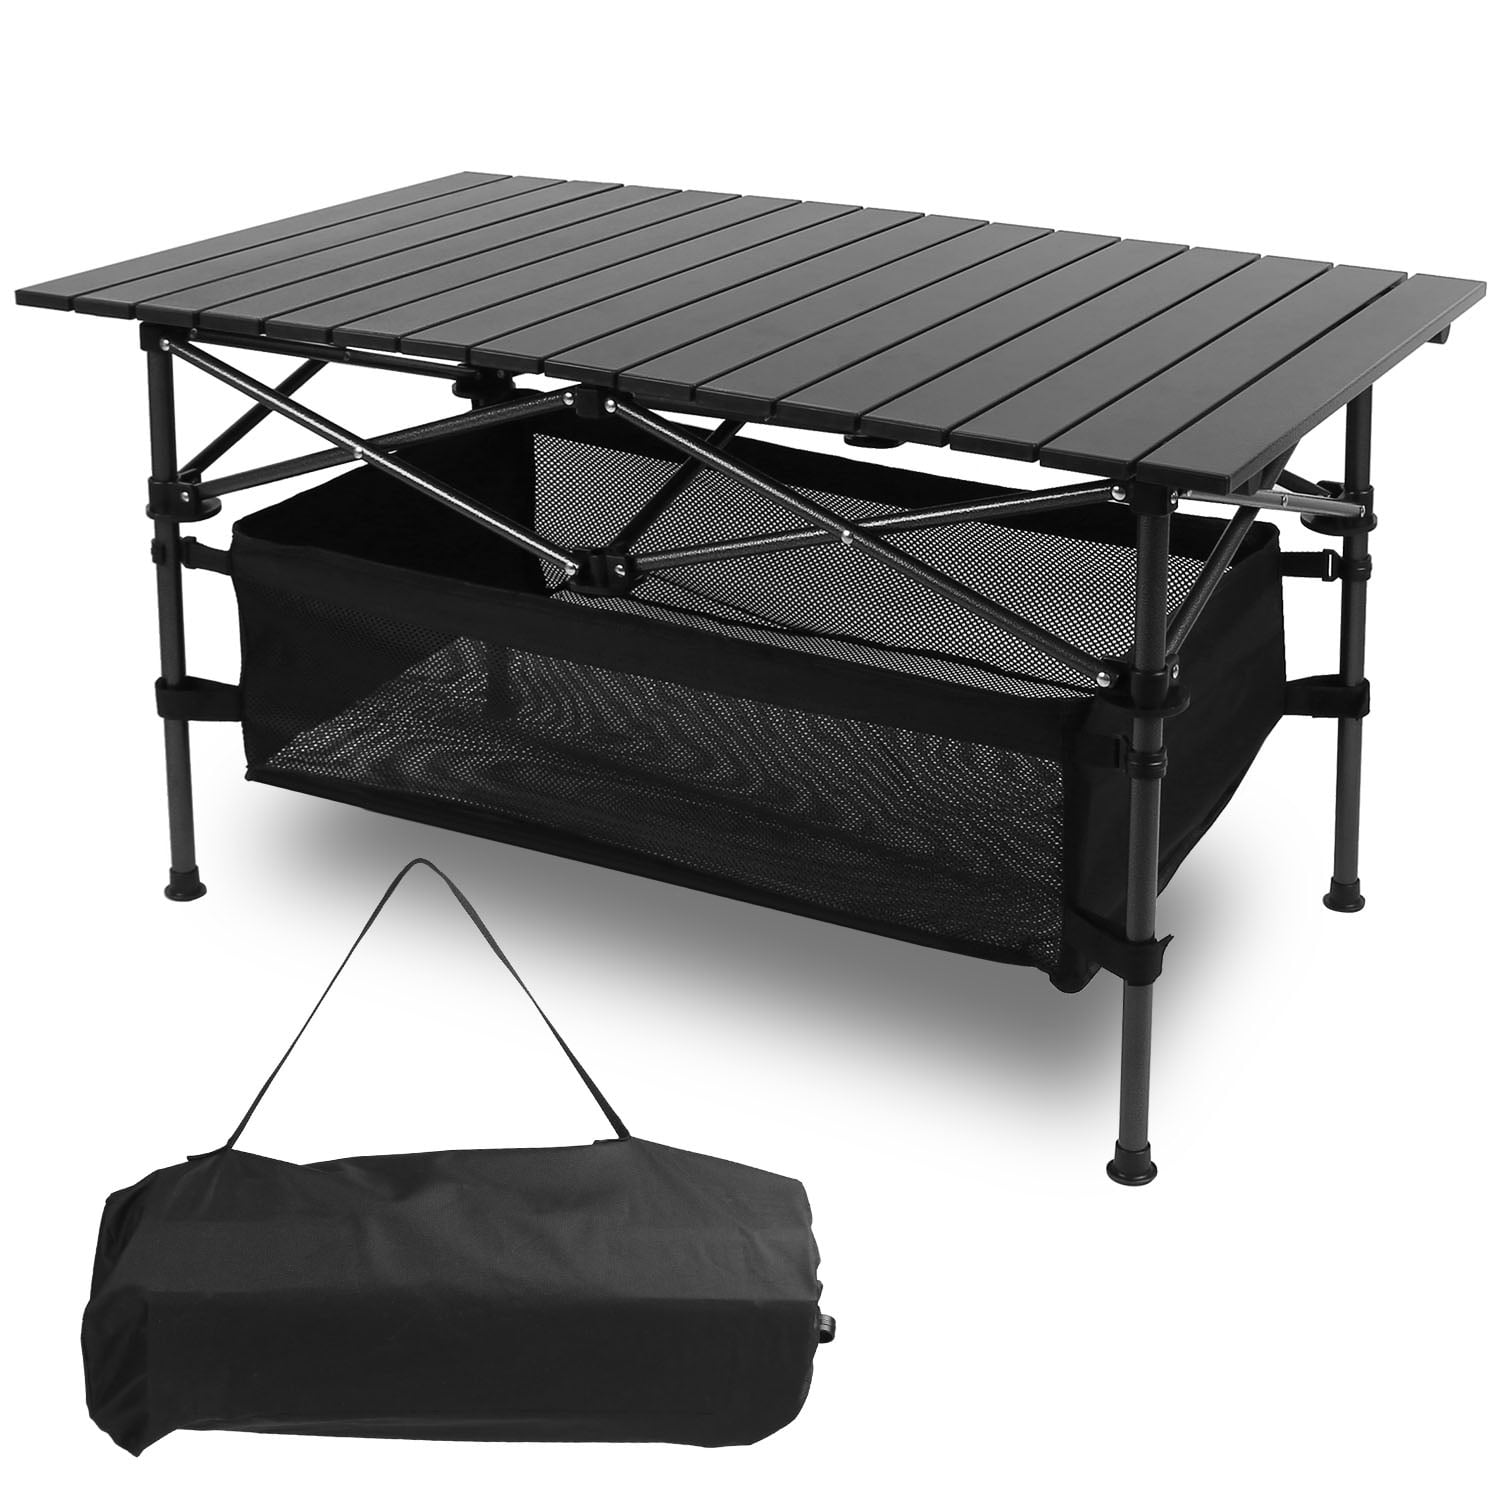 Roll-up Camping Table, Portable Folding Aluminum Picnic Table with ...